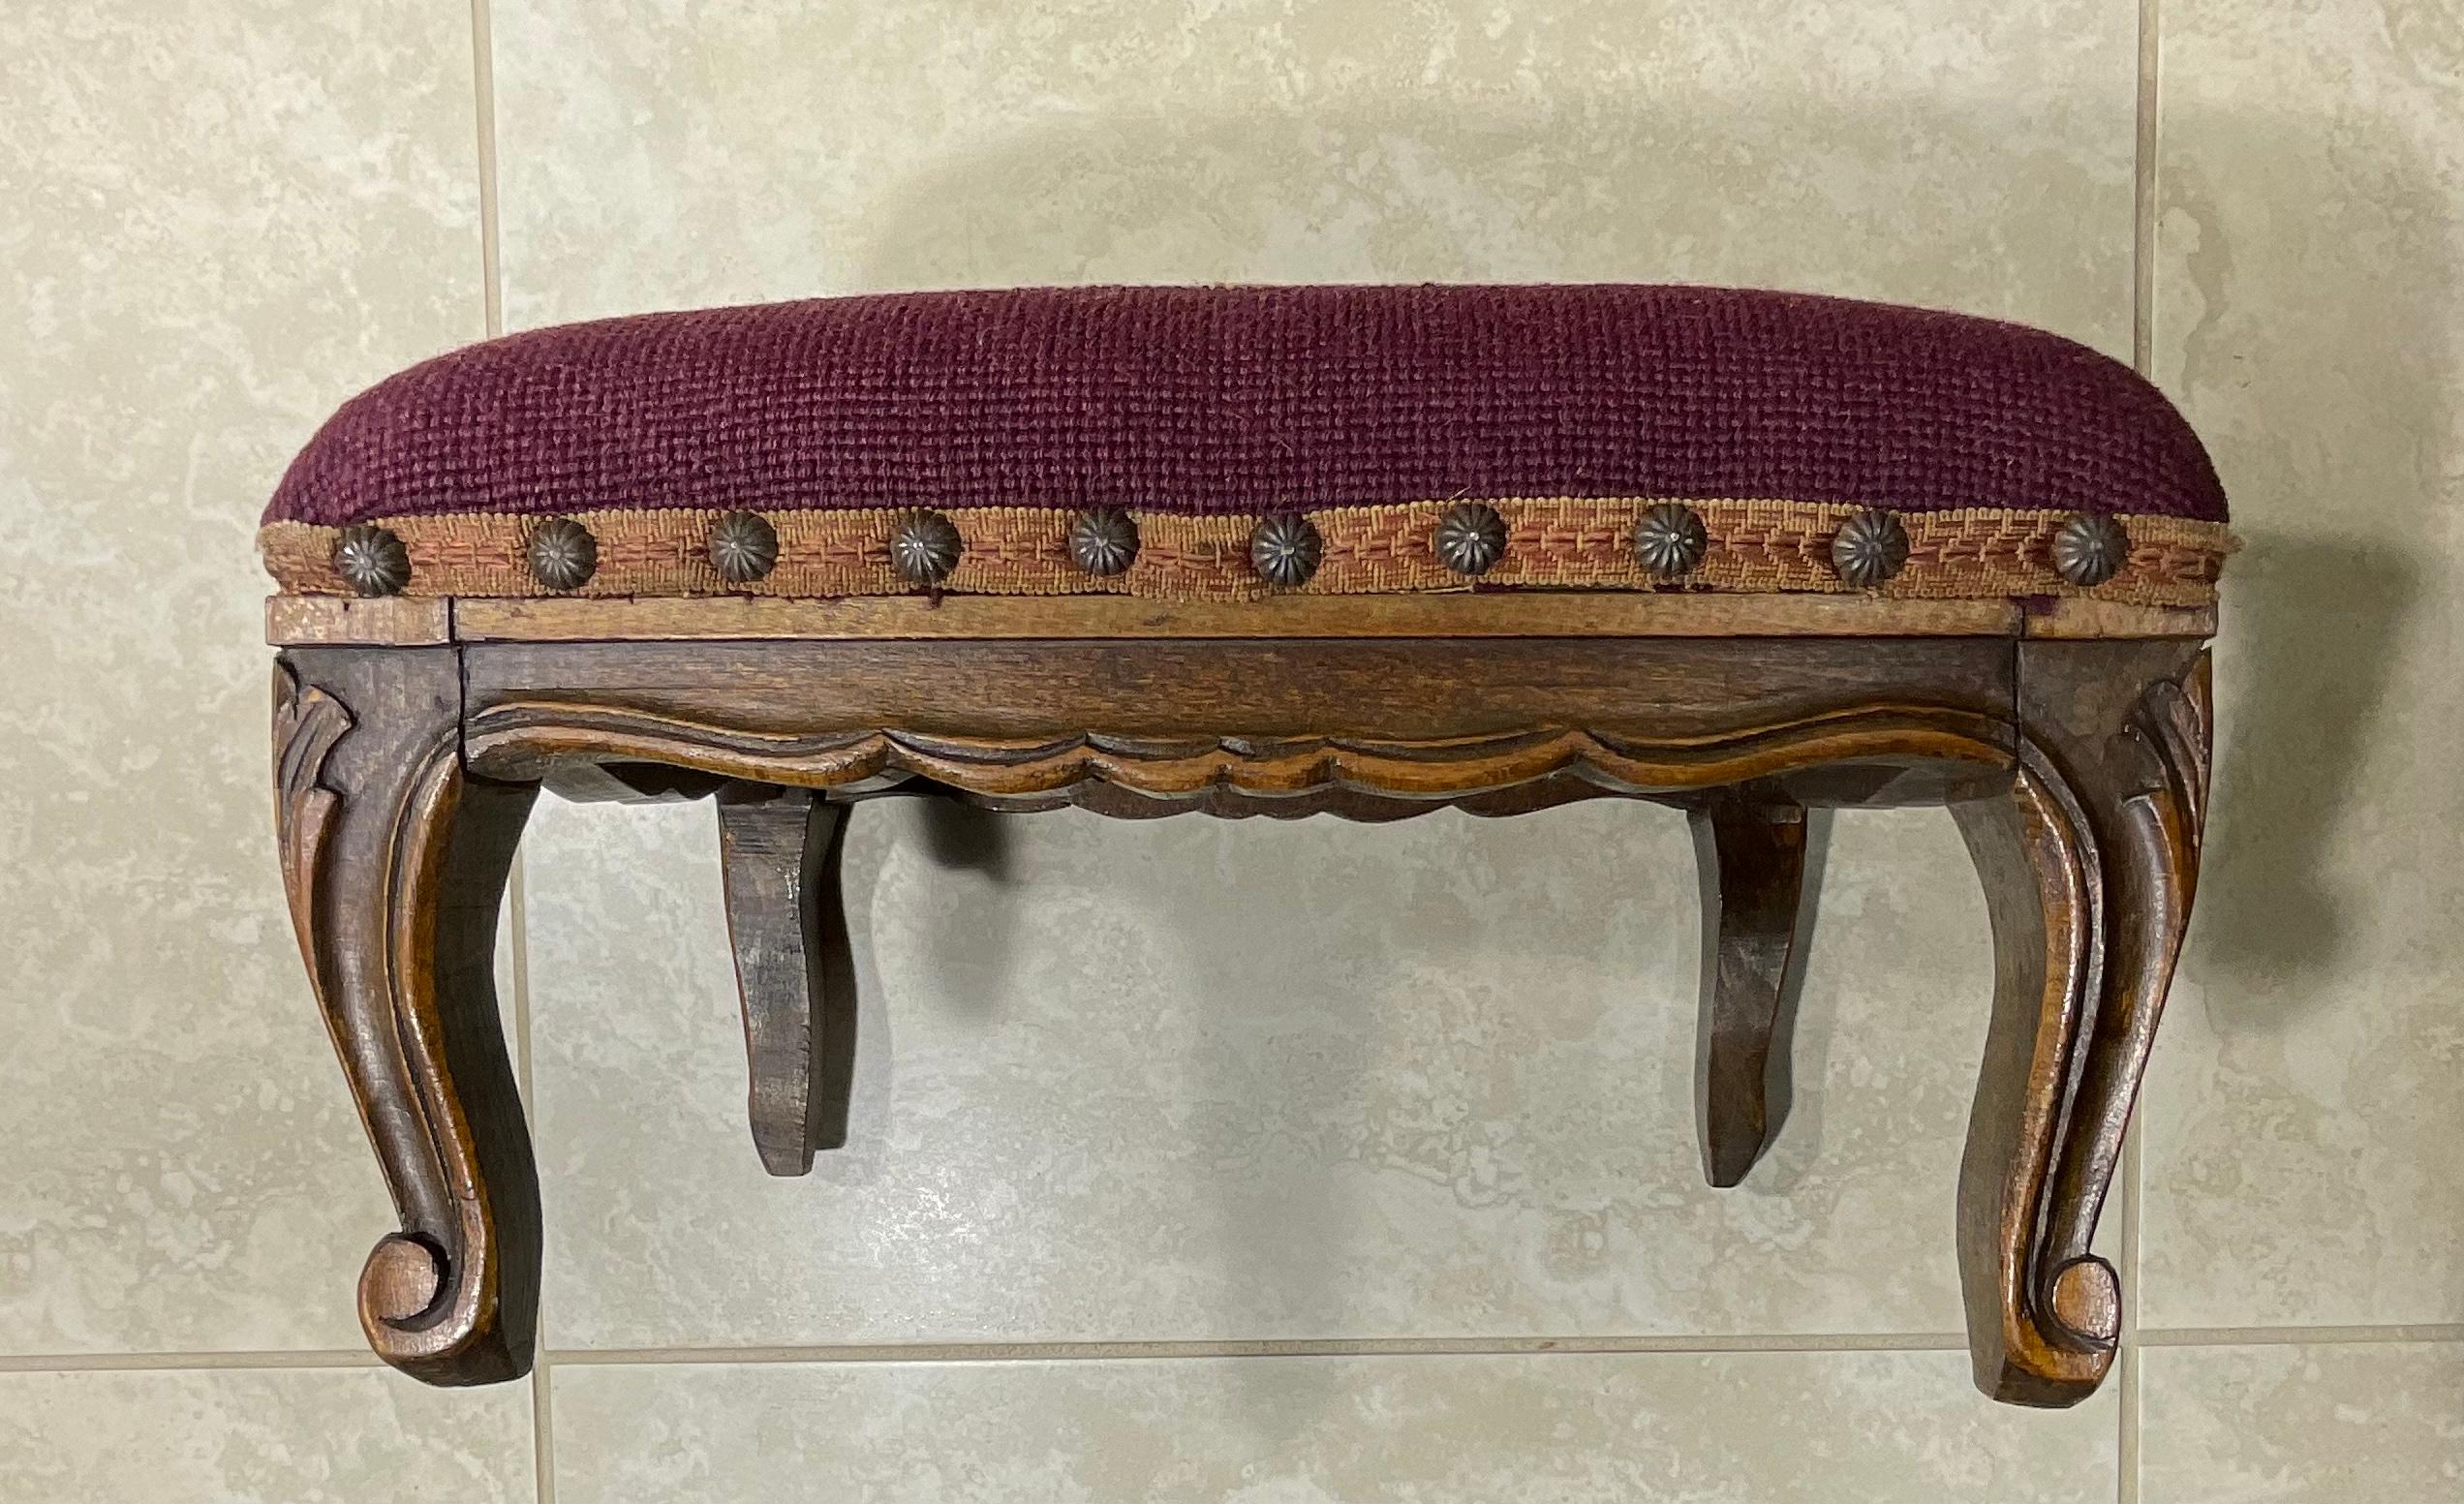 Early 20th Century Petite Antique Hand Carved Needlepoint Textile Upholstered Foot Stool For Sale